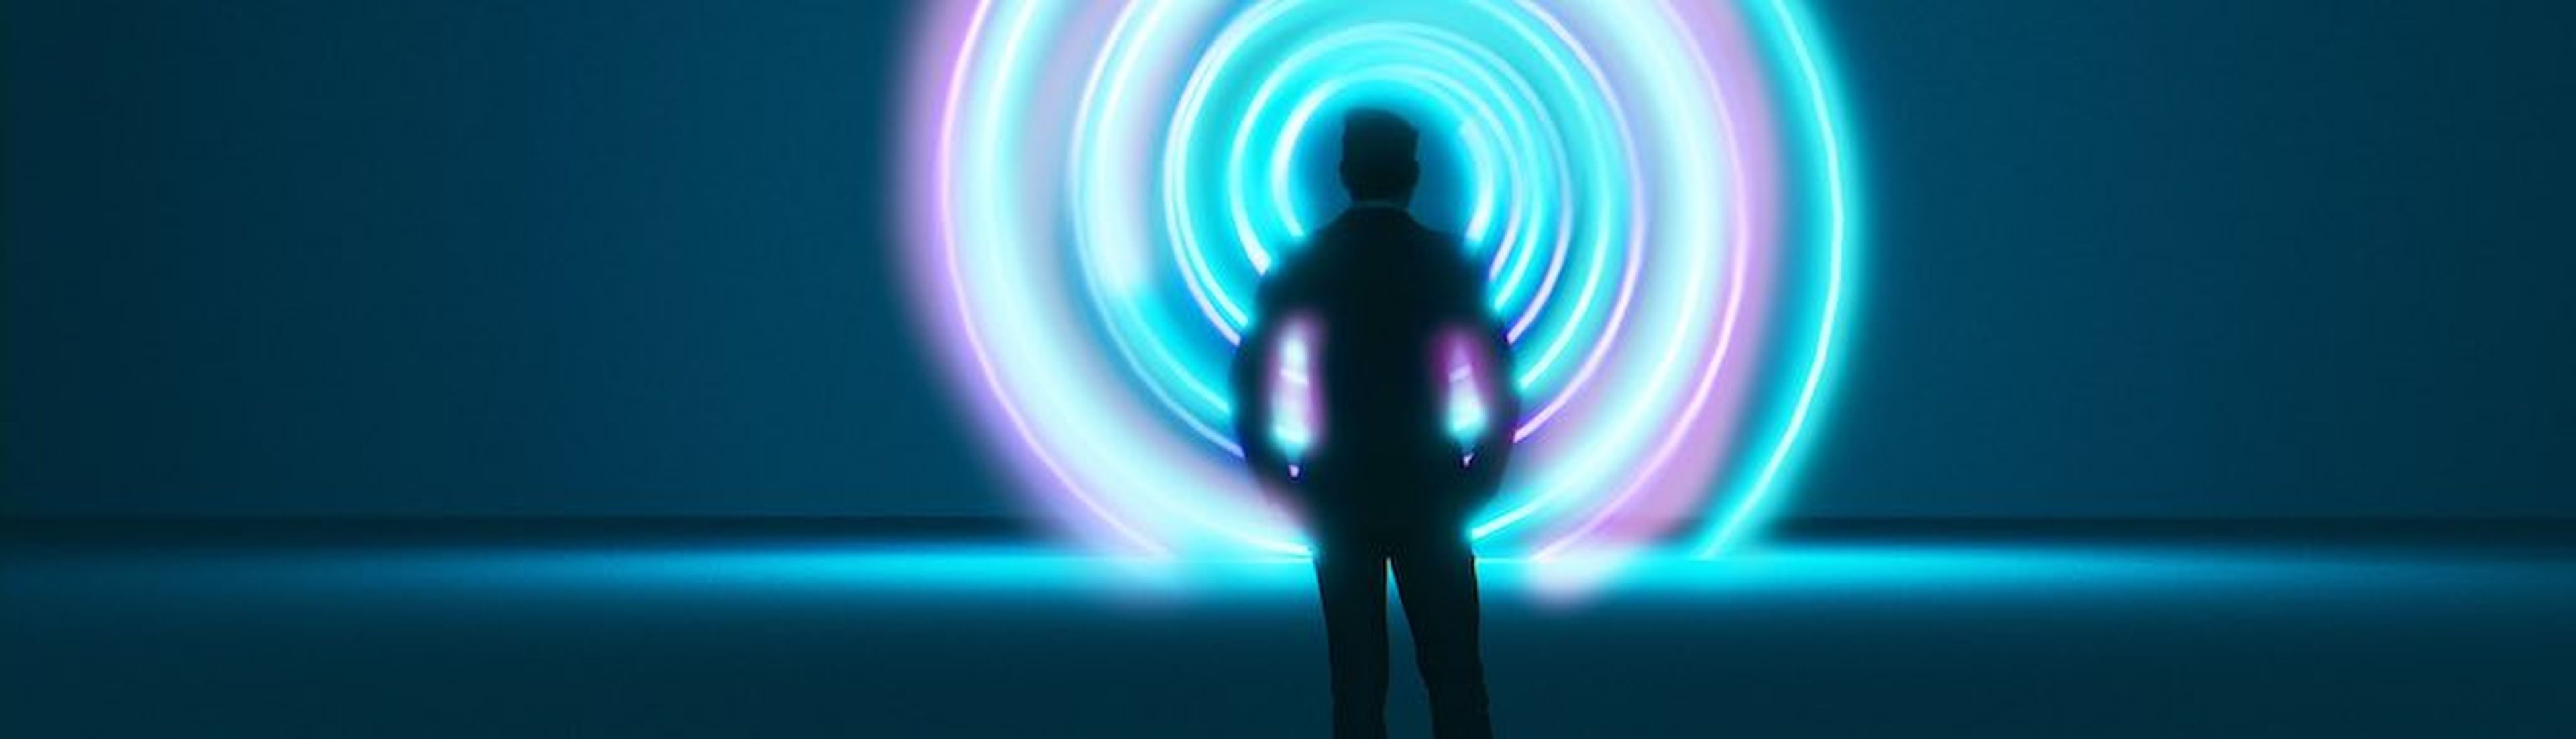 Colorful portal or vortex with a spiral pattern. Man stands in front of it undecided. Maybe it is a time machine.